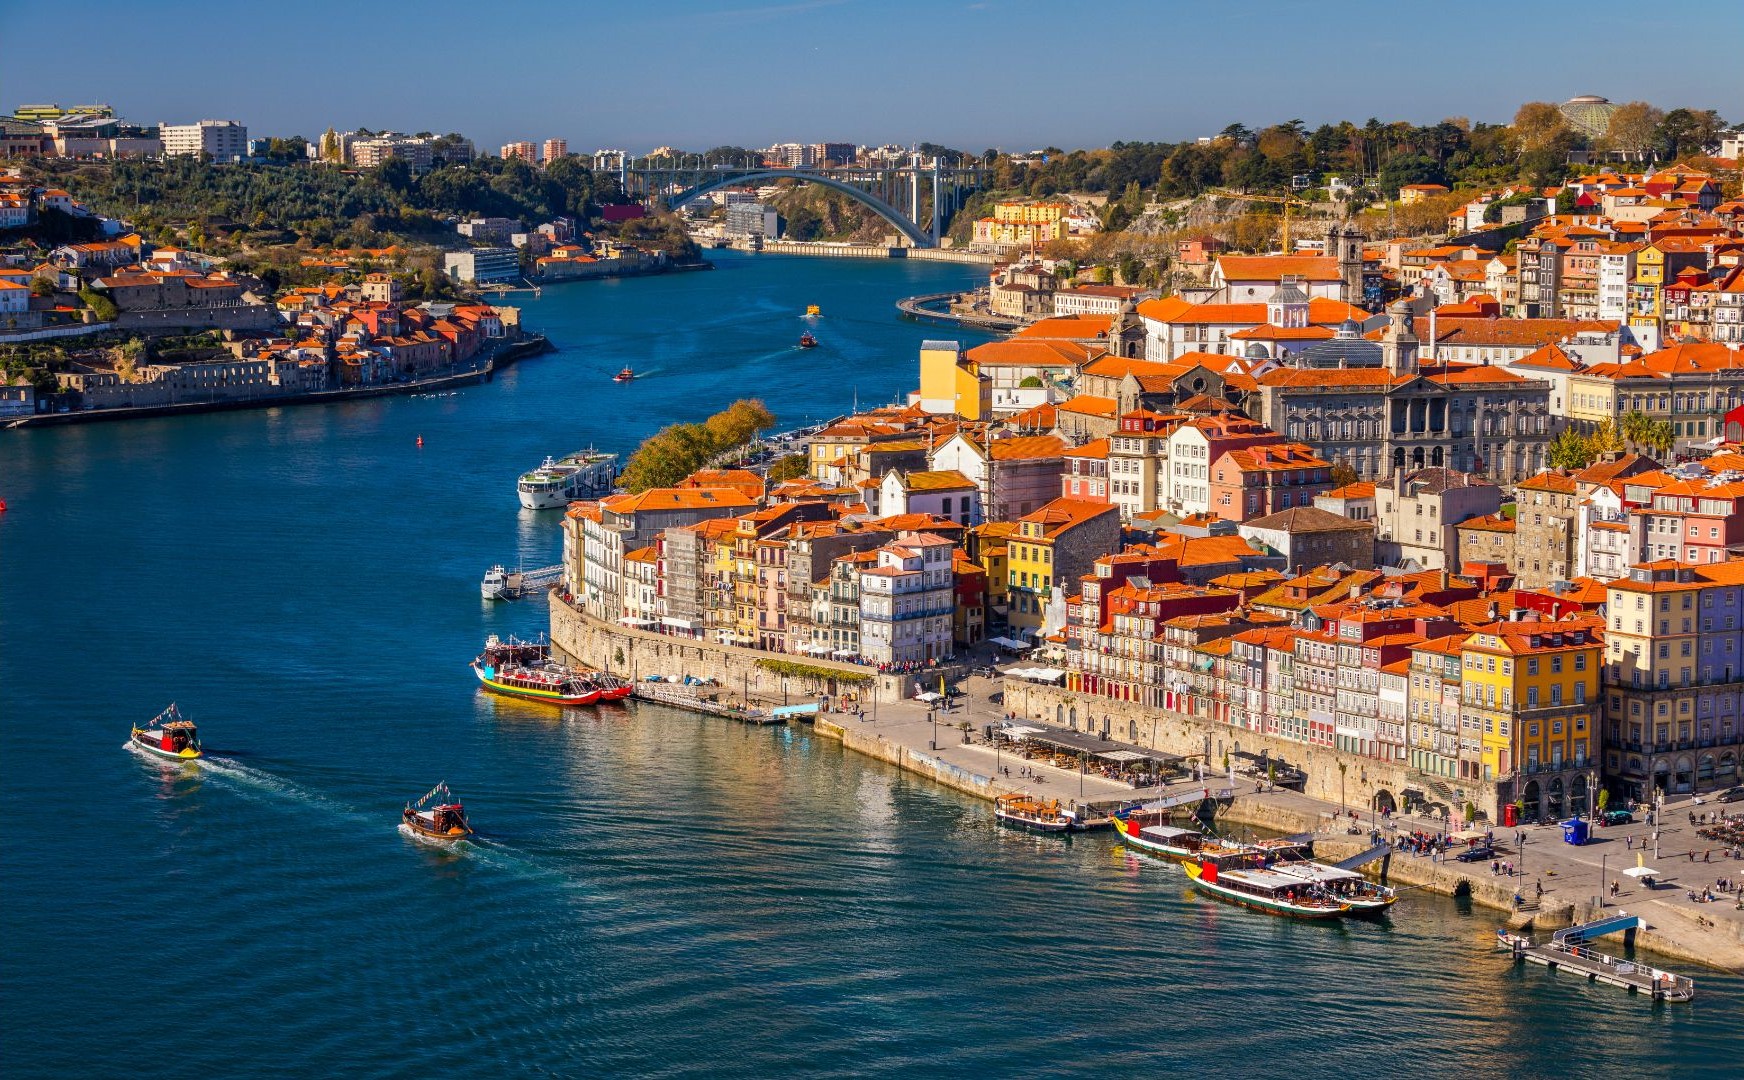 Portugal is undeniably one of the best countries in Europe for those seeking seaside beauty.